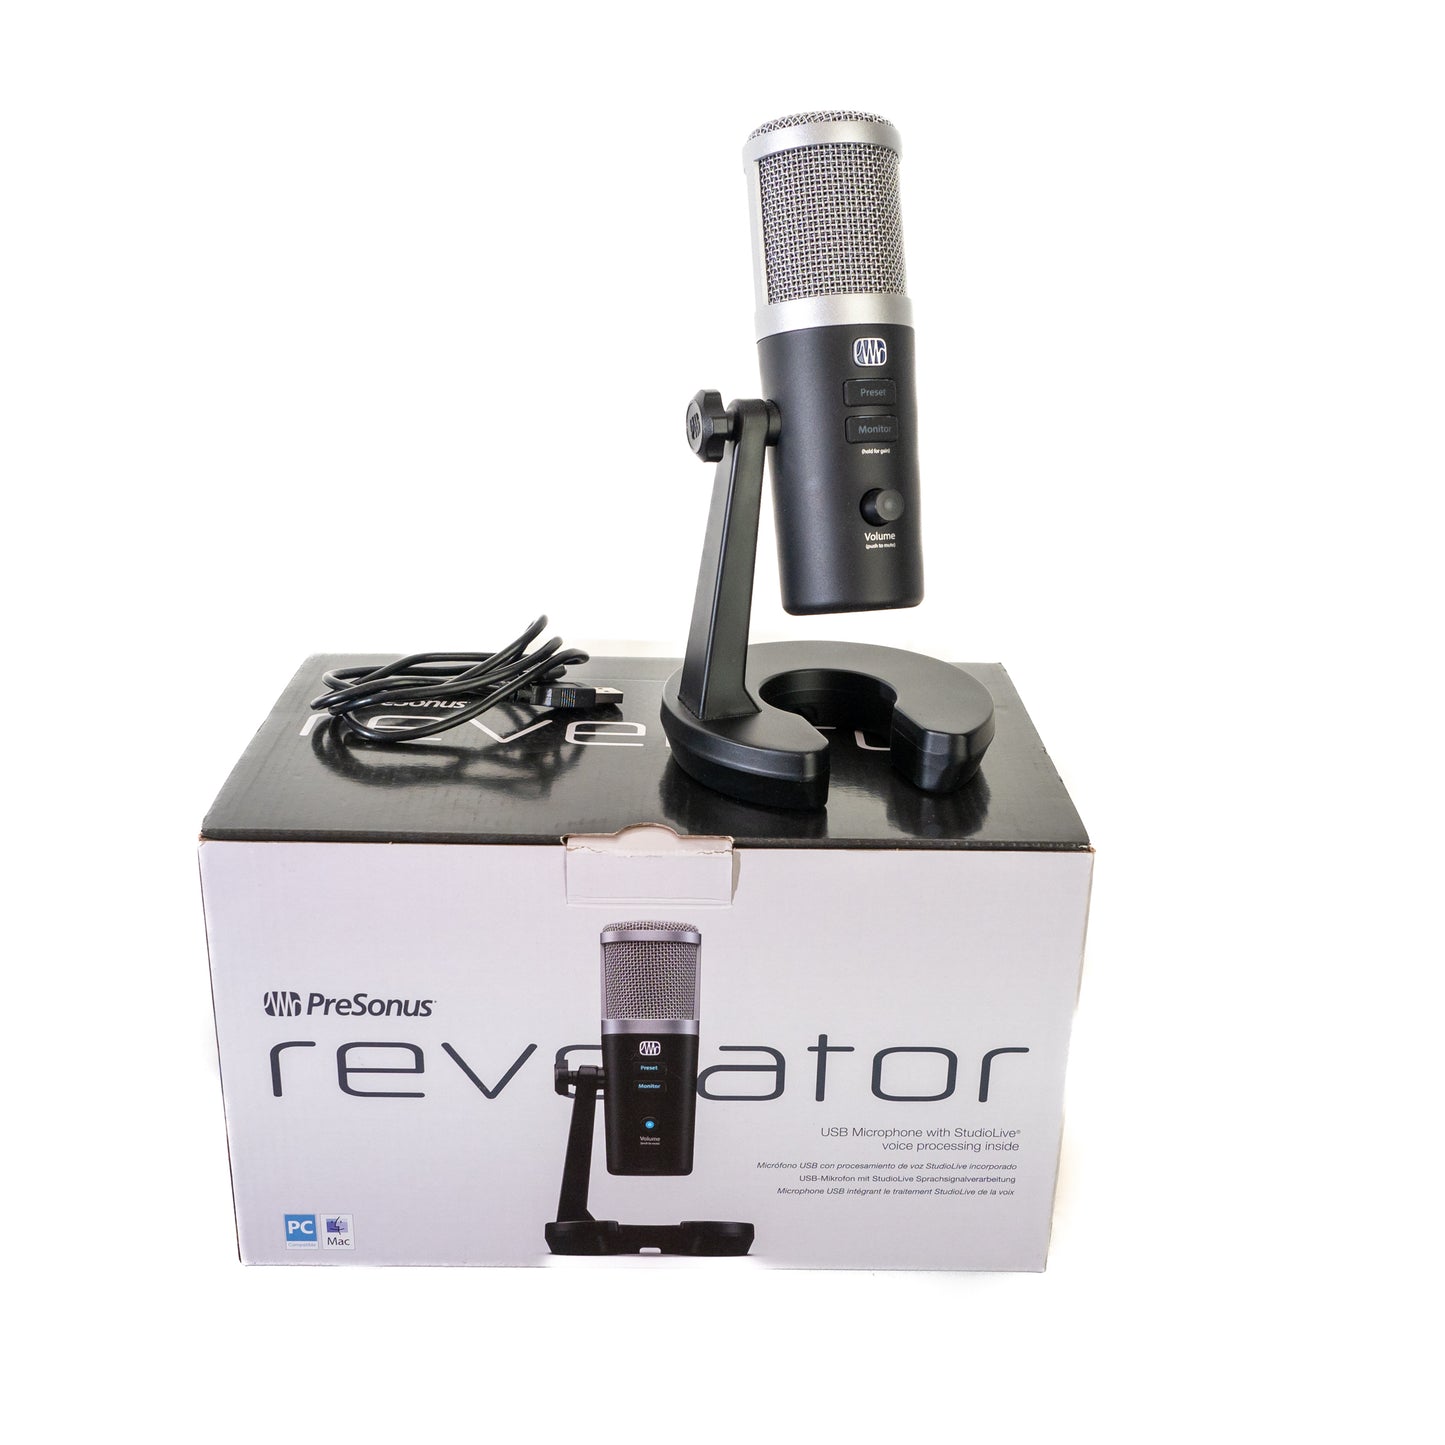 Presonus Revelator USB Microphone with stand and voice processing